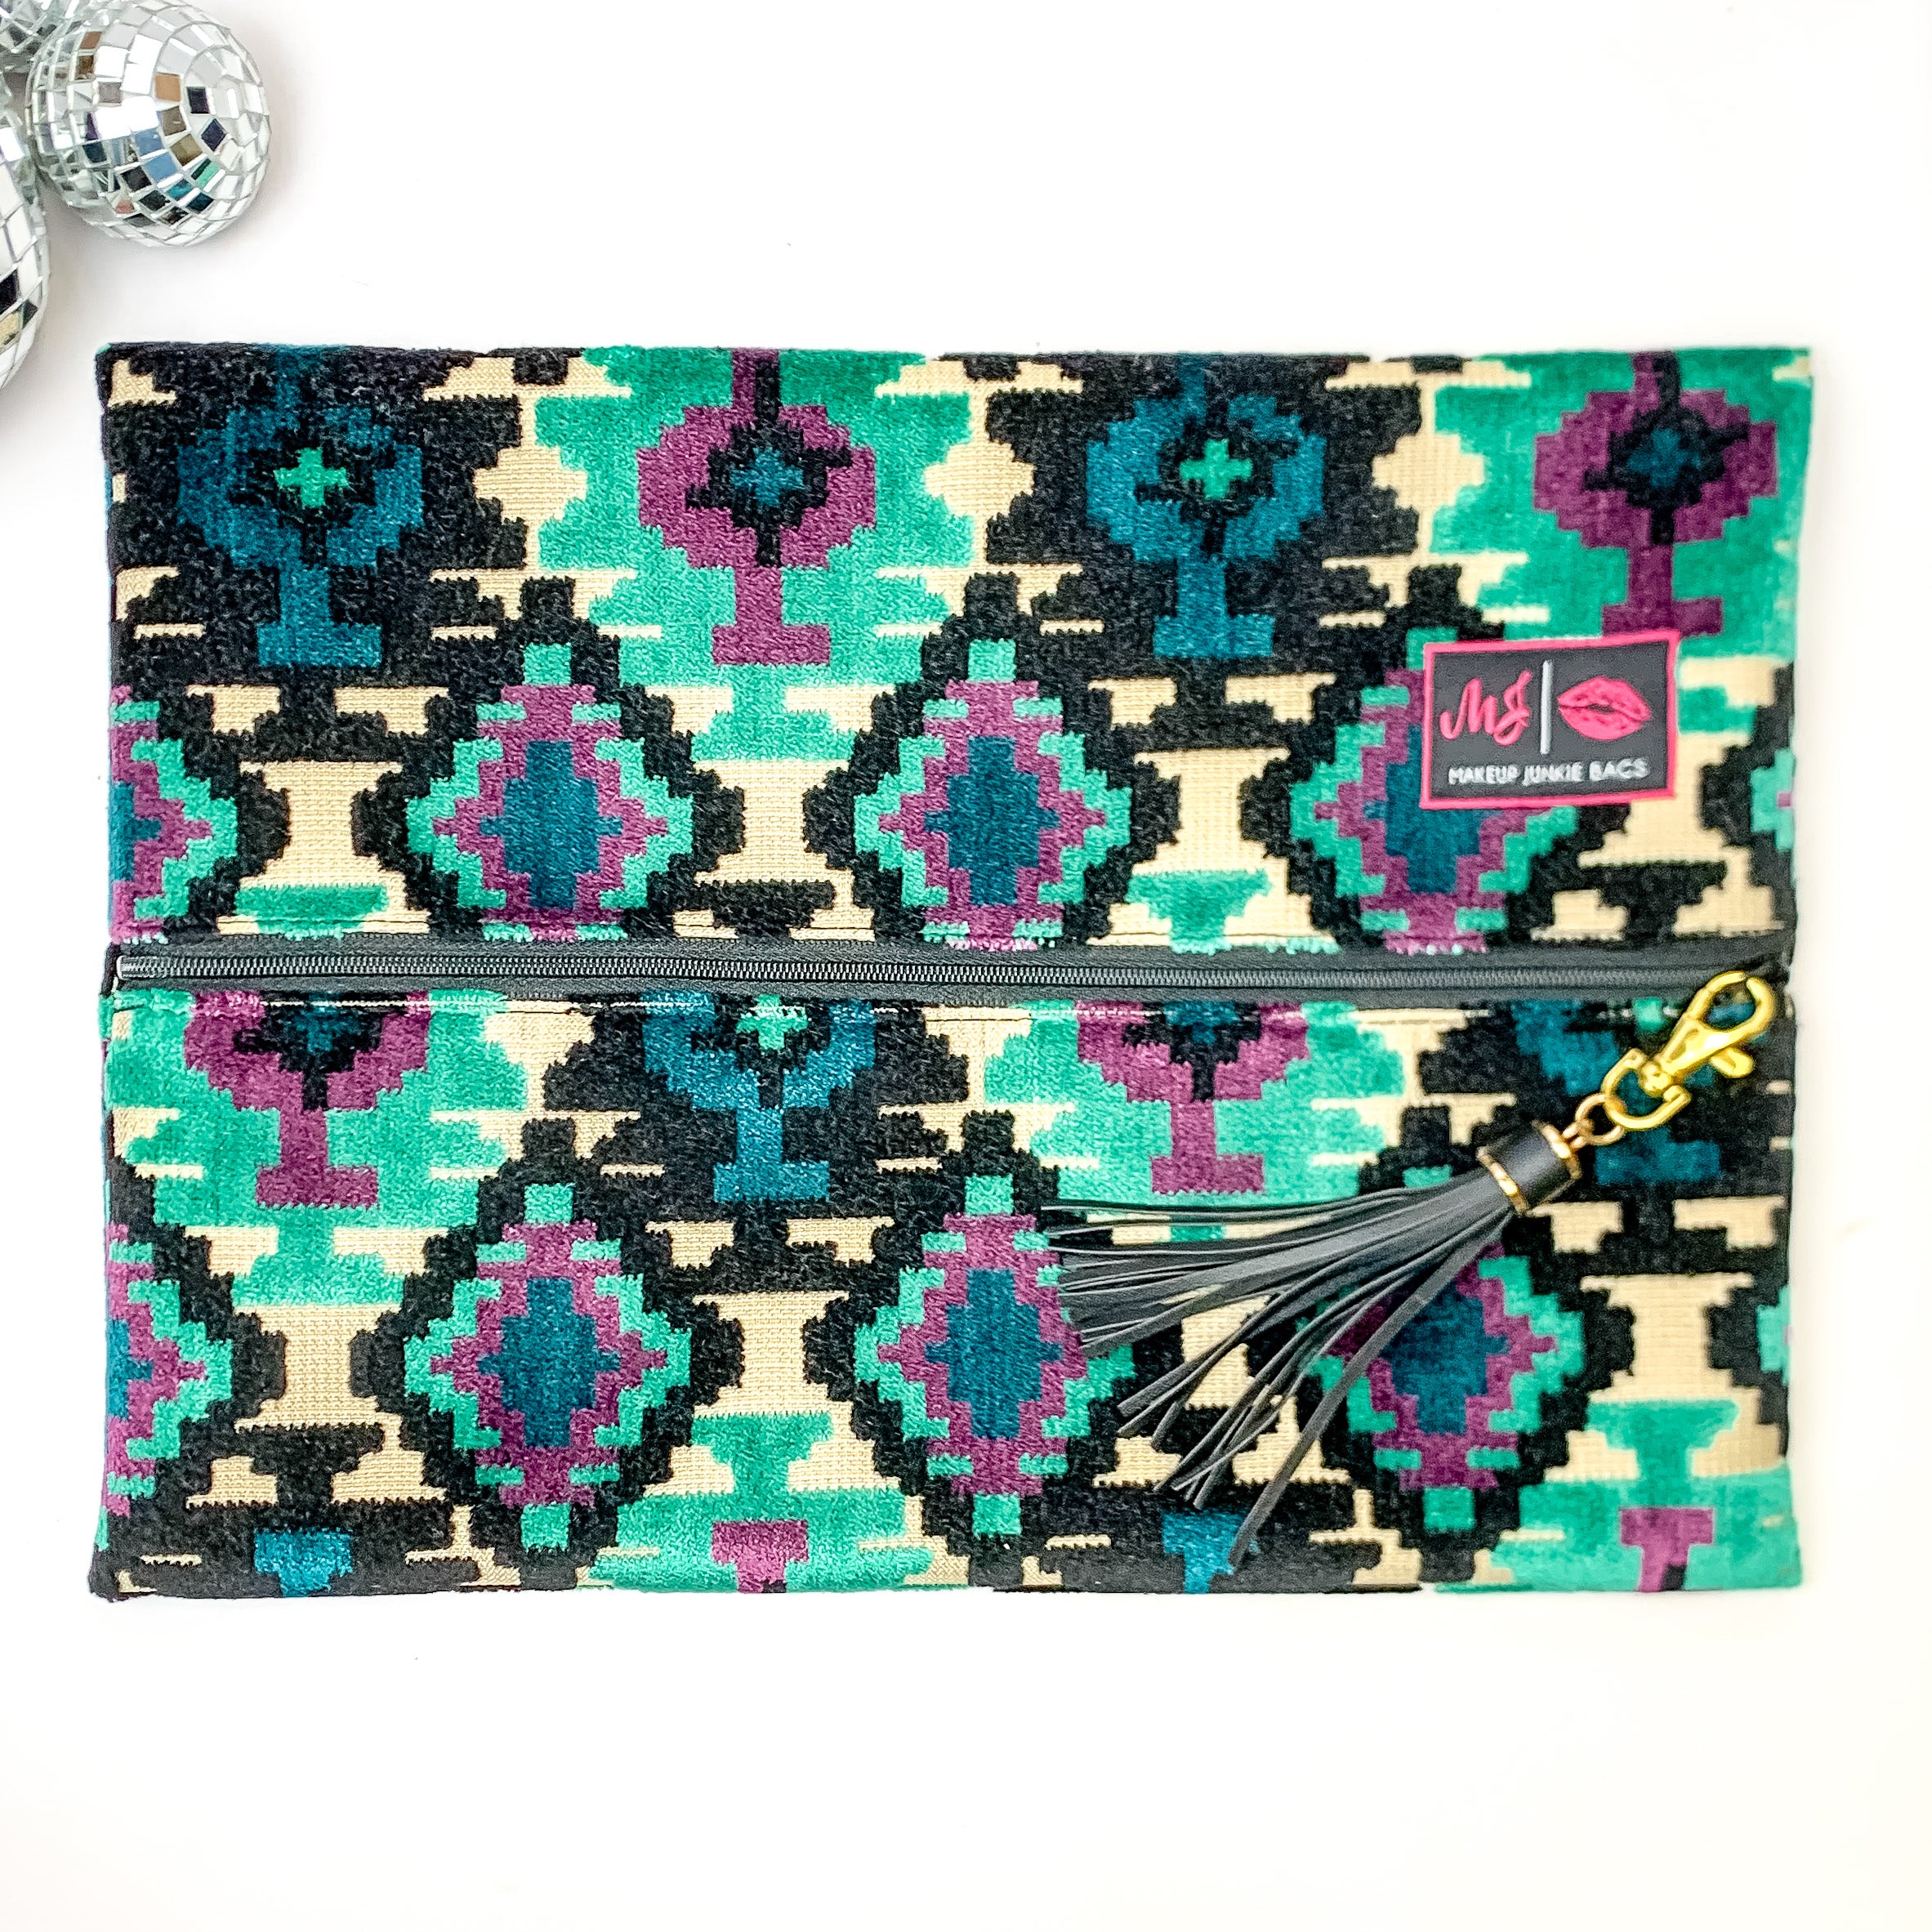 Makeup Junkie | Large Midnight Aztec Lay Flat Bag in Turquoise Green and Black Mix - Giddy Up Glamour Boutique